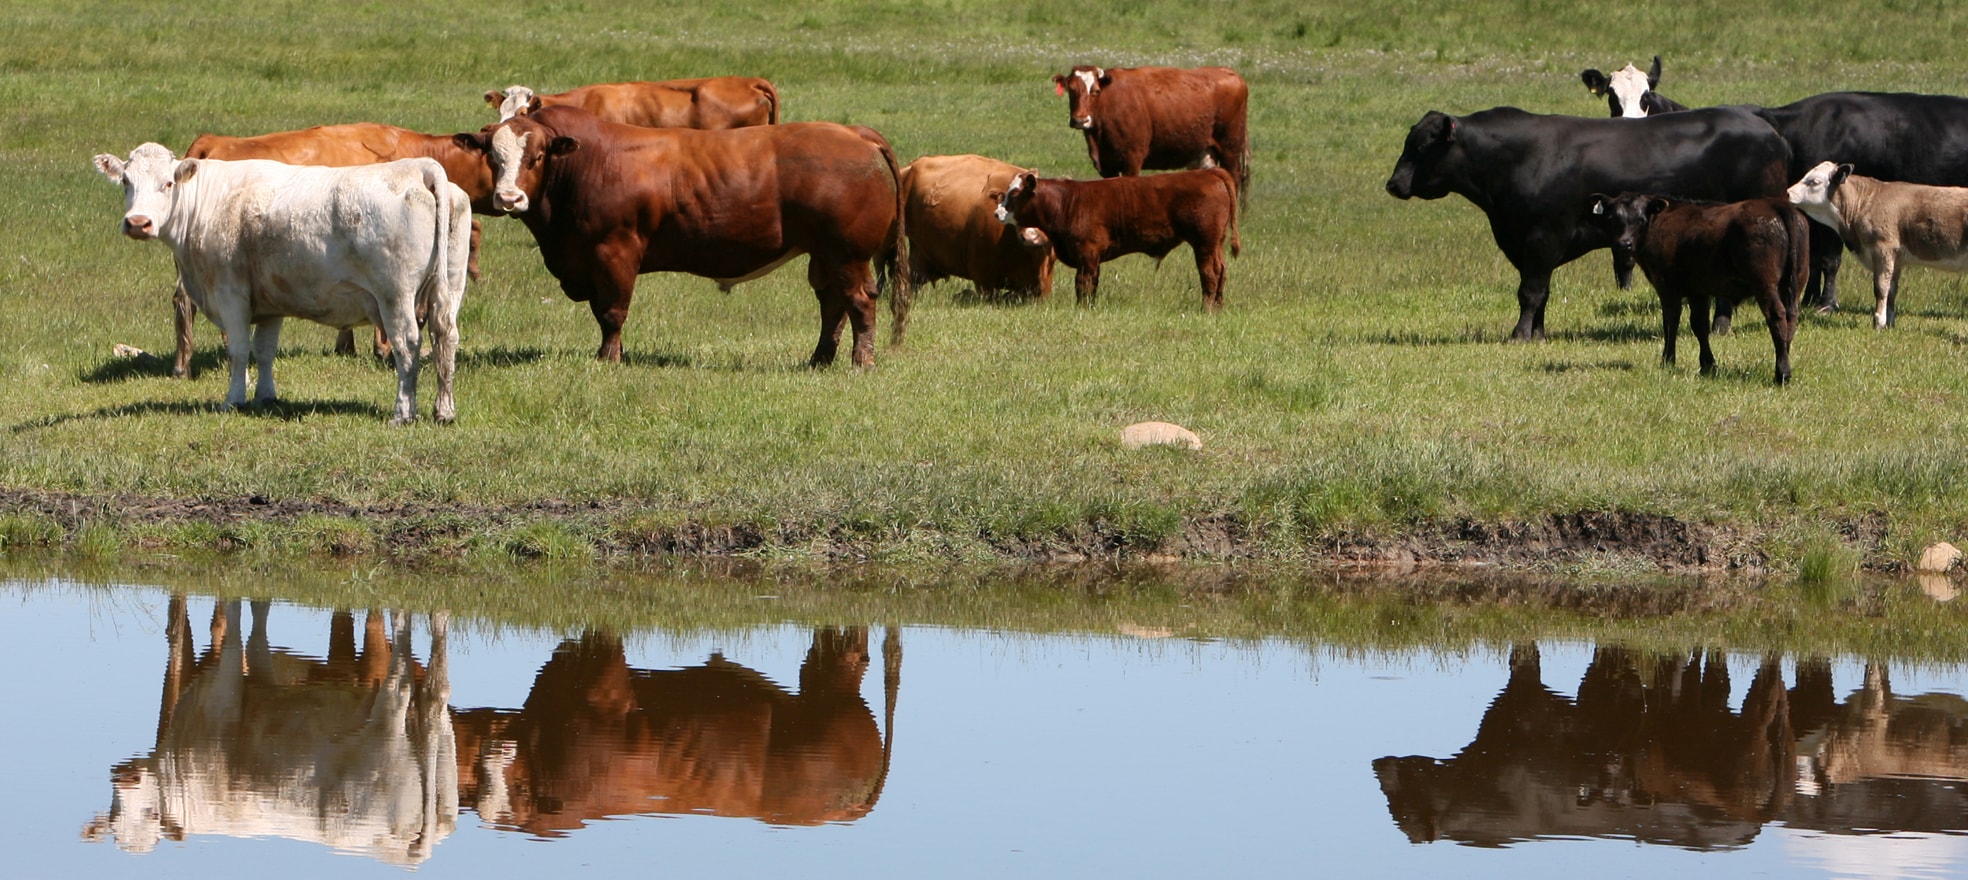 Group of cows on a farm with reflections from a body of water.